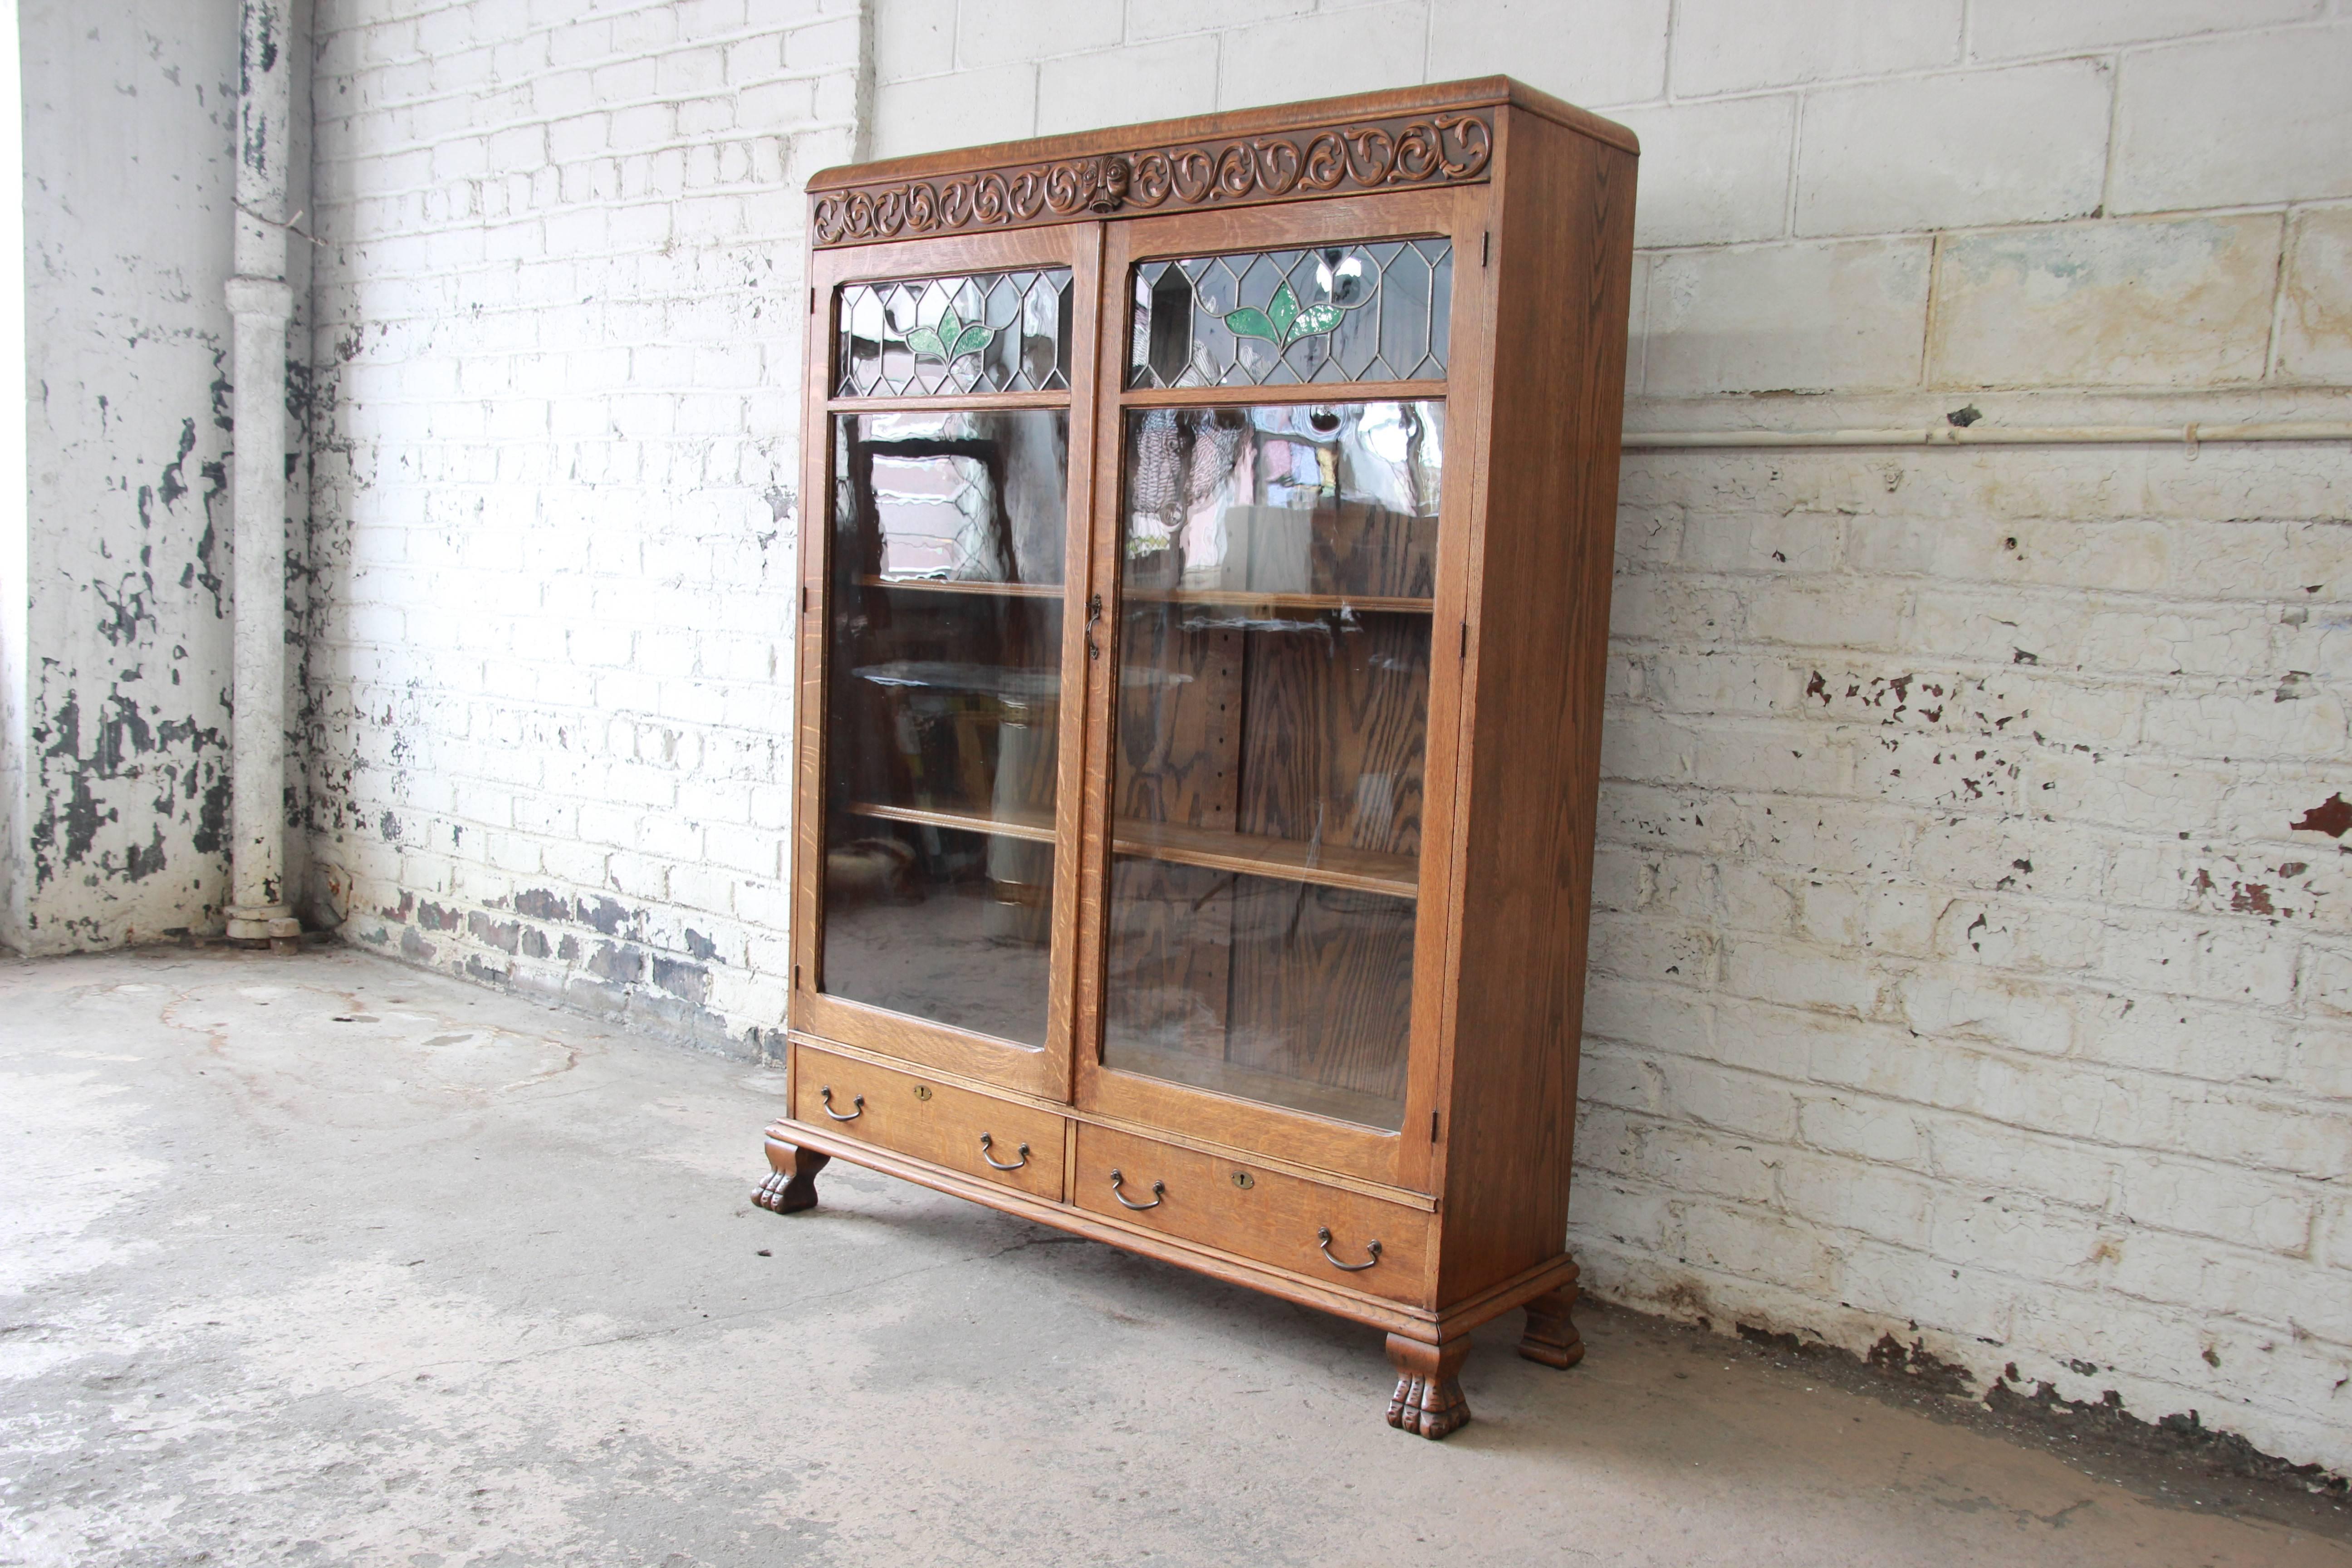 An exceptional antique carved oak bookcase. The bookcase features gorgeous quarter sawn oak wood grain and beautiful leaded stained glass doors. There are nice carved wood details along the top of the bookcase, including a carved face. The case